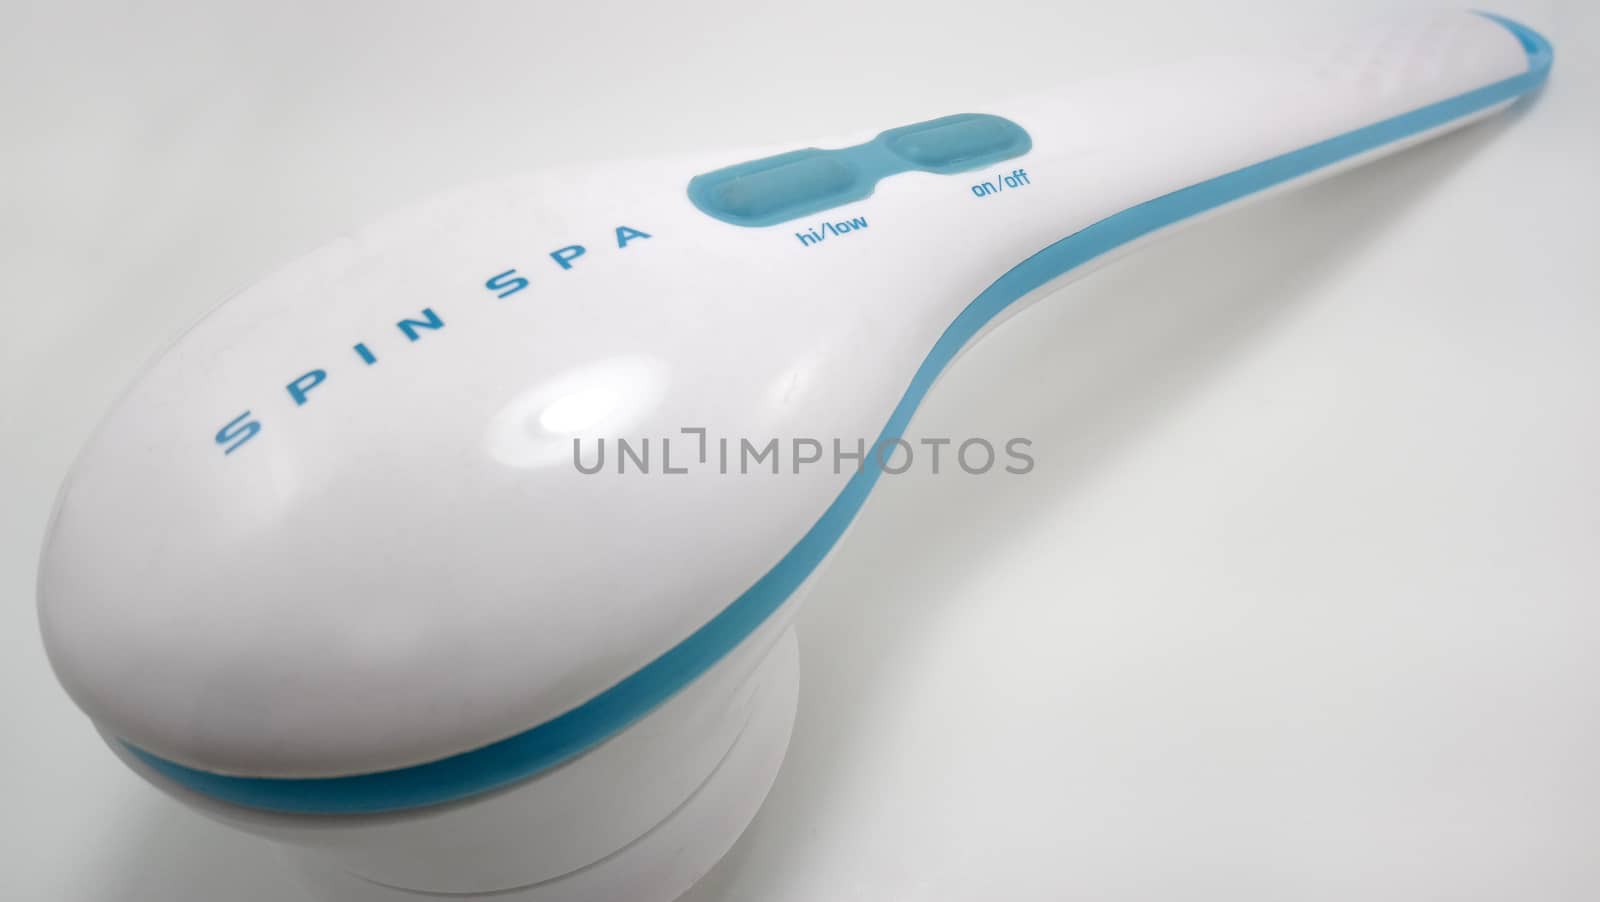 MANILA, PH - JUNE 23 - Spin spa electronic portable massager on June 23, 2020 in Manila, Philippines.